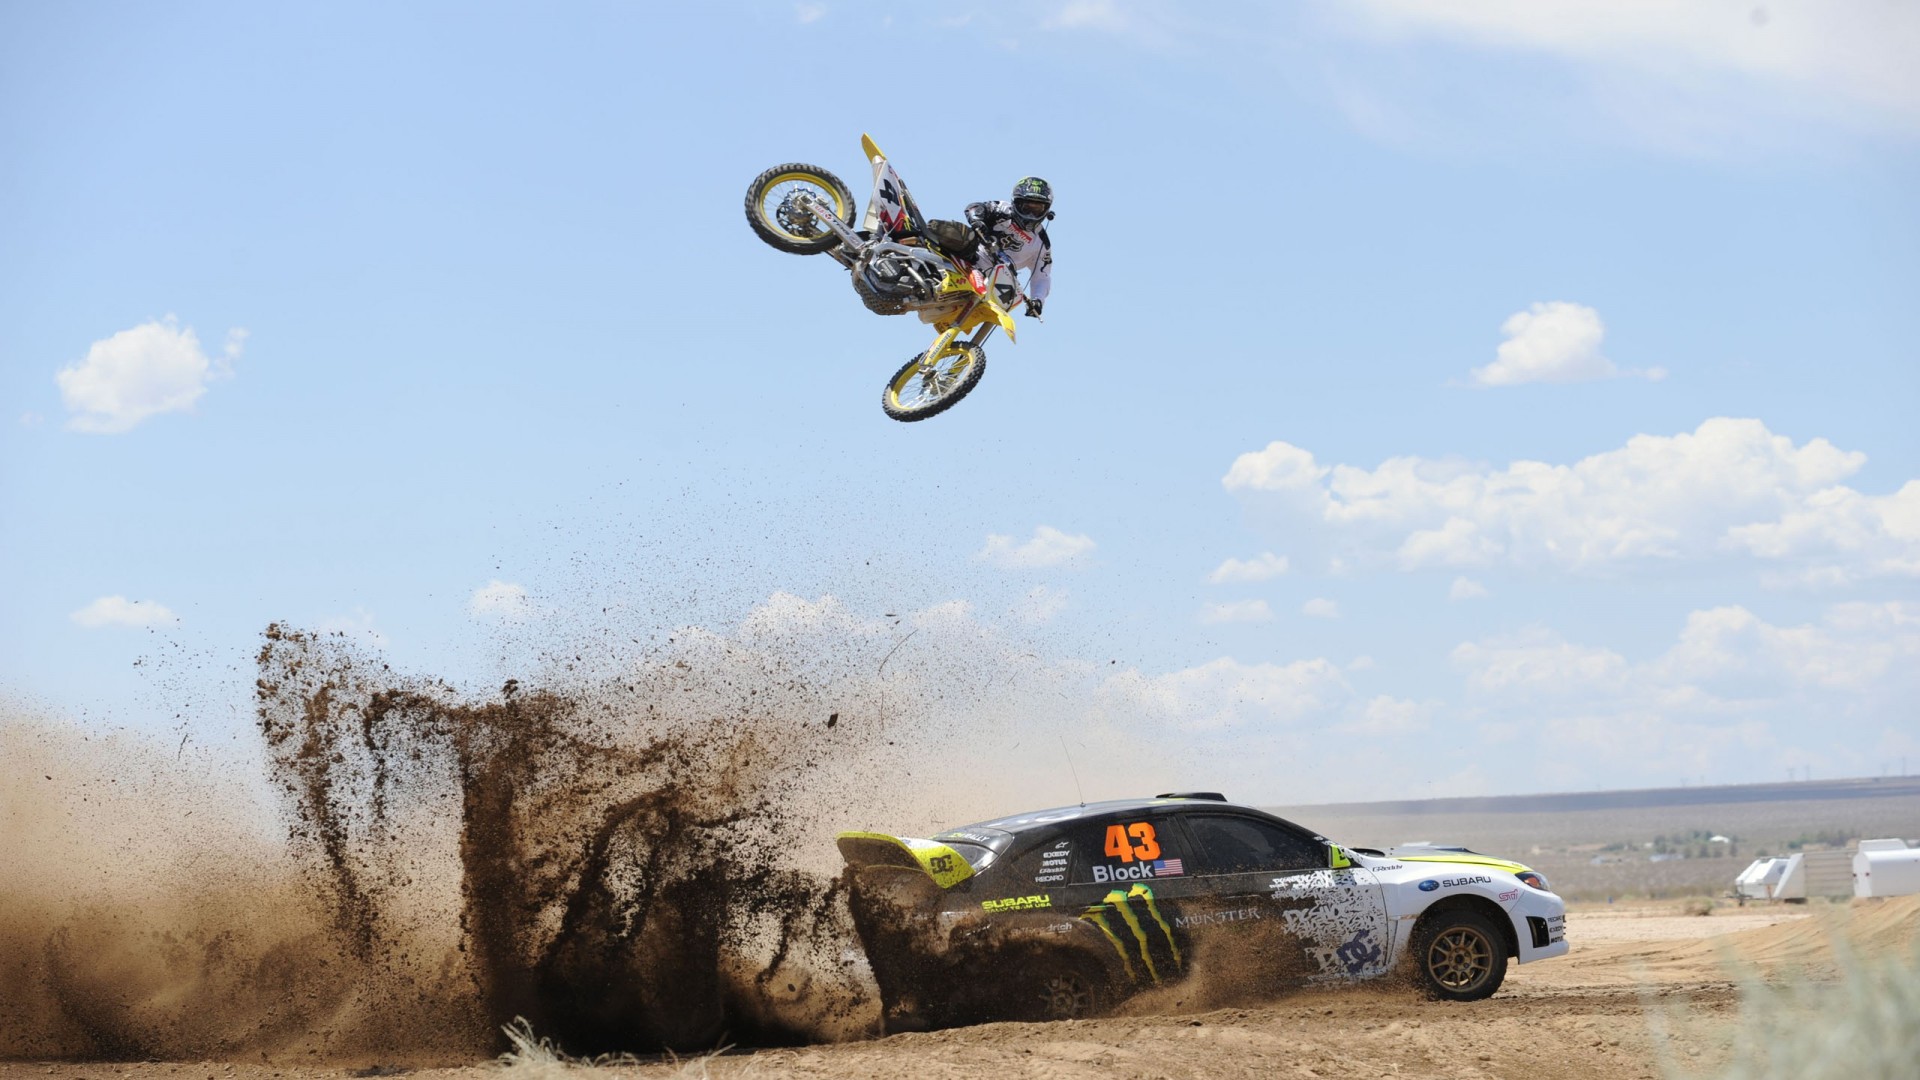 High Quality Motocross HD Wallpaper | Full HD Pictures